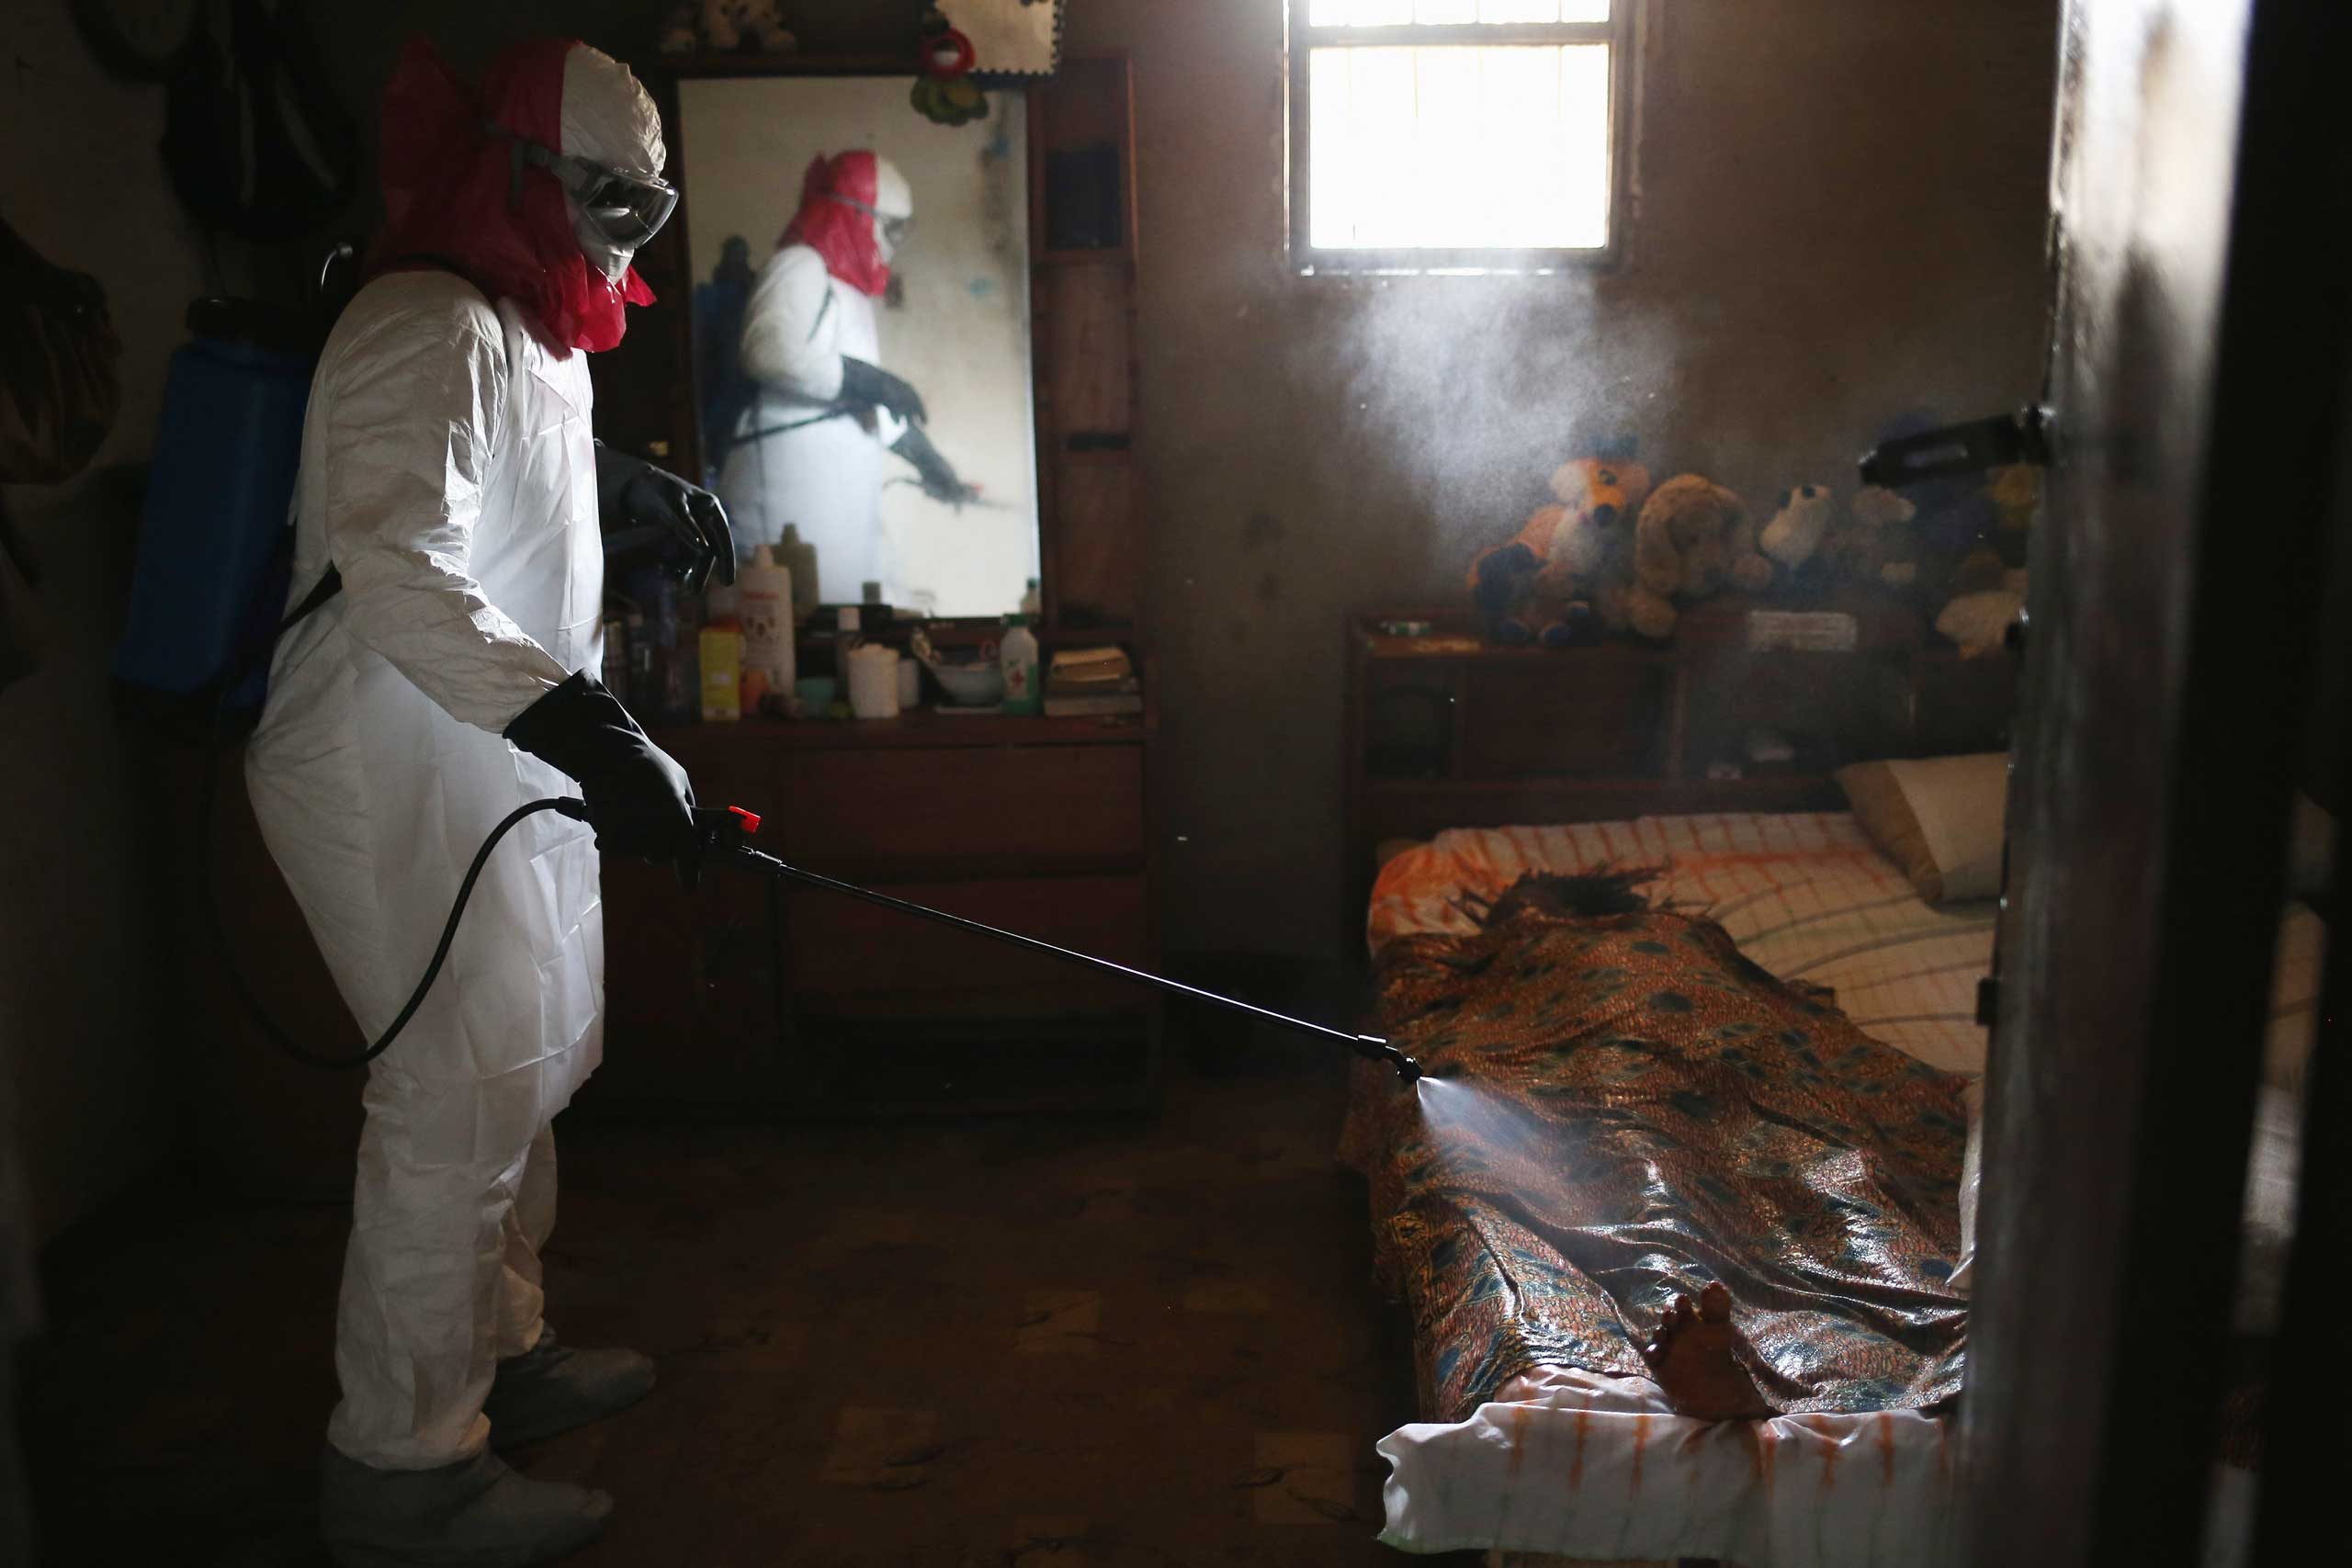 A burial team from the Liberian health department sprays disinfectant over the body of a woman suspected of dying of the Ebola virus on Aug. 14, 2014 in Monrovia. (John Moore—Getty Images)